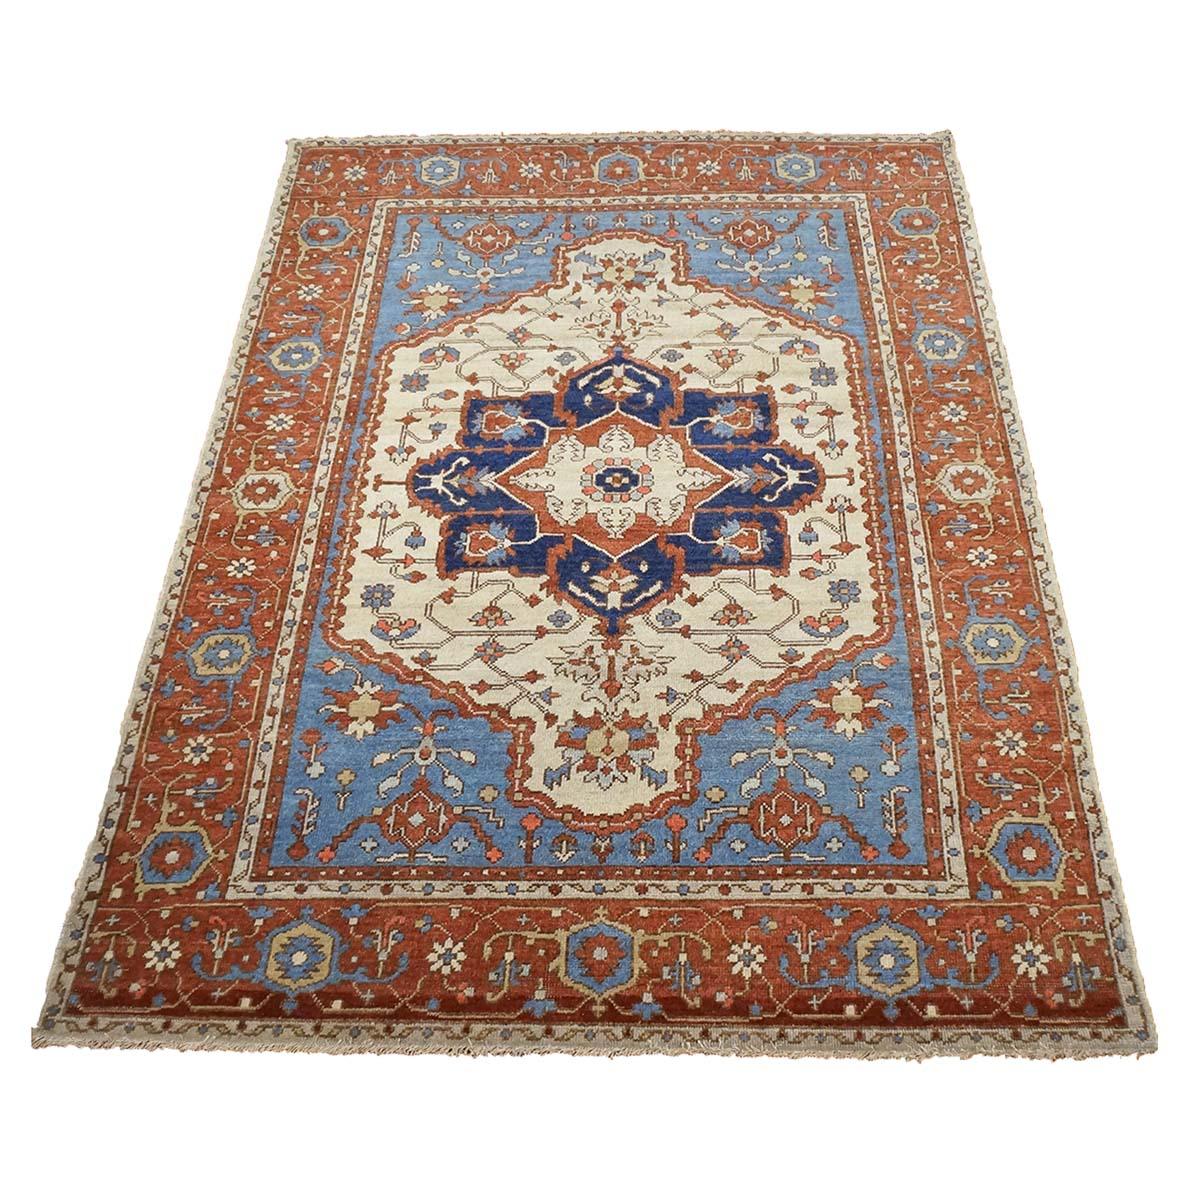 Ashly Fine Rugs presents an antique recreation of an original Persian Serapi Handmade Area Rug. Part of our own previous production, this antique recreation was thought of and created in-house and 100% handmade in Afghanistan by master weavers.